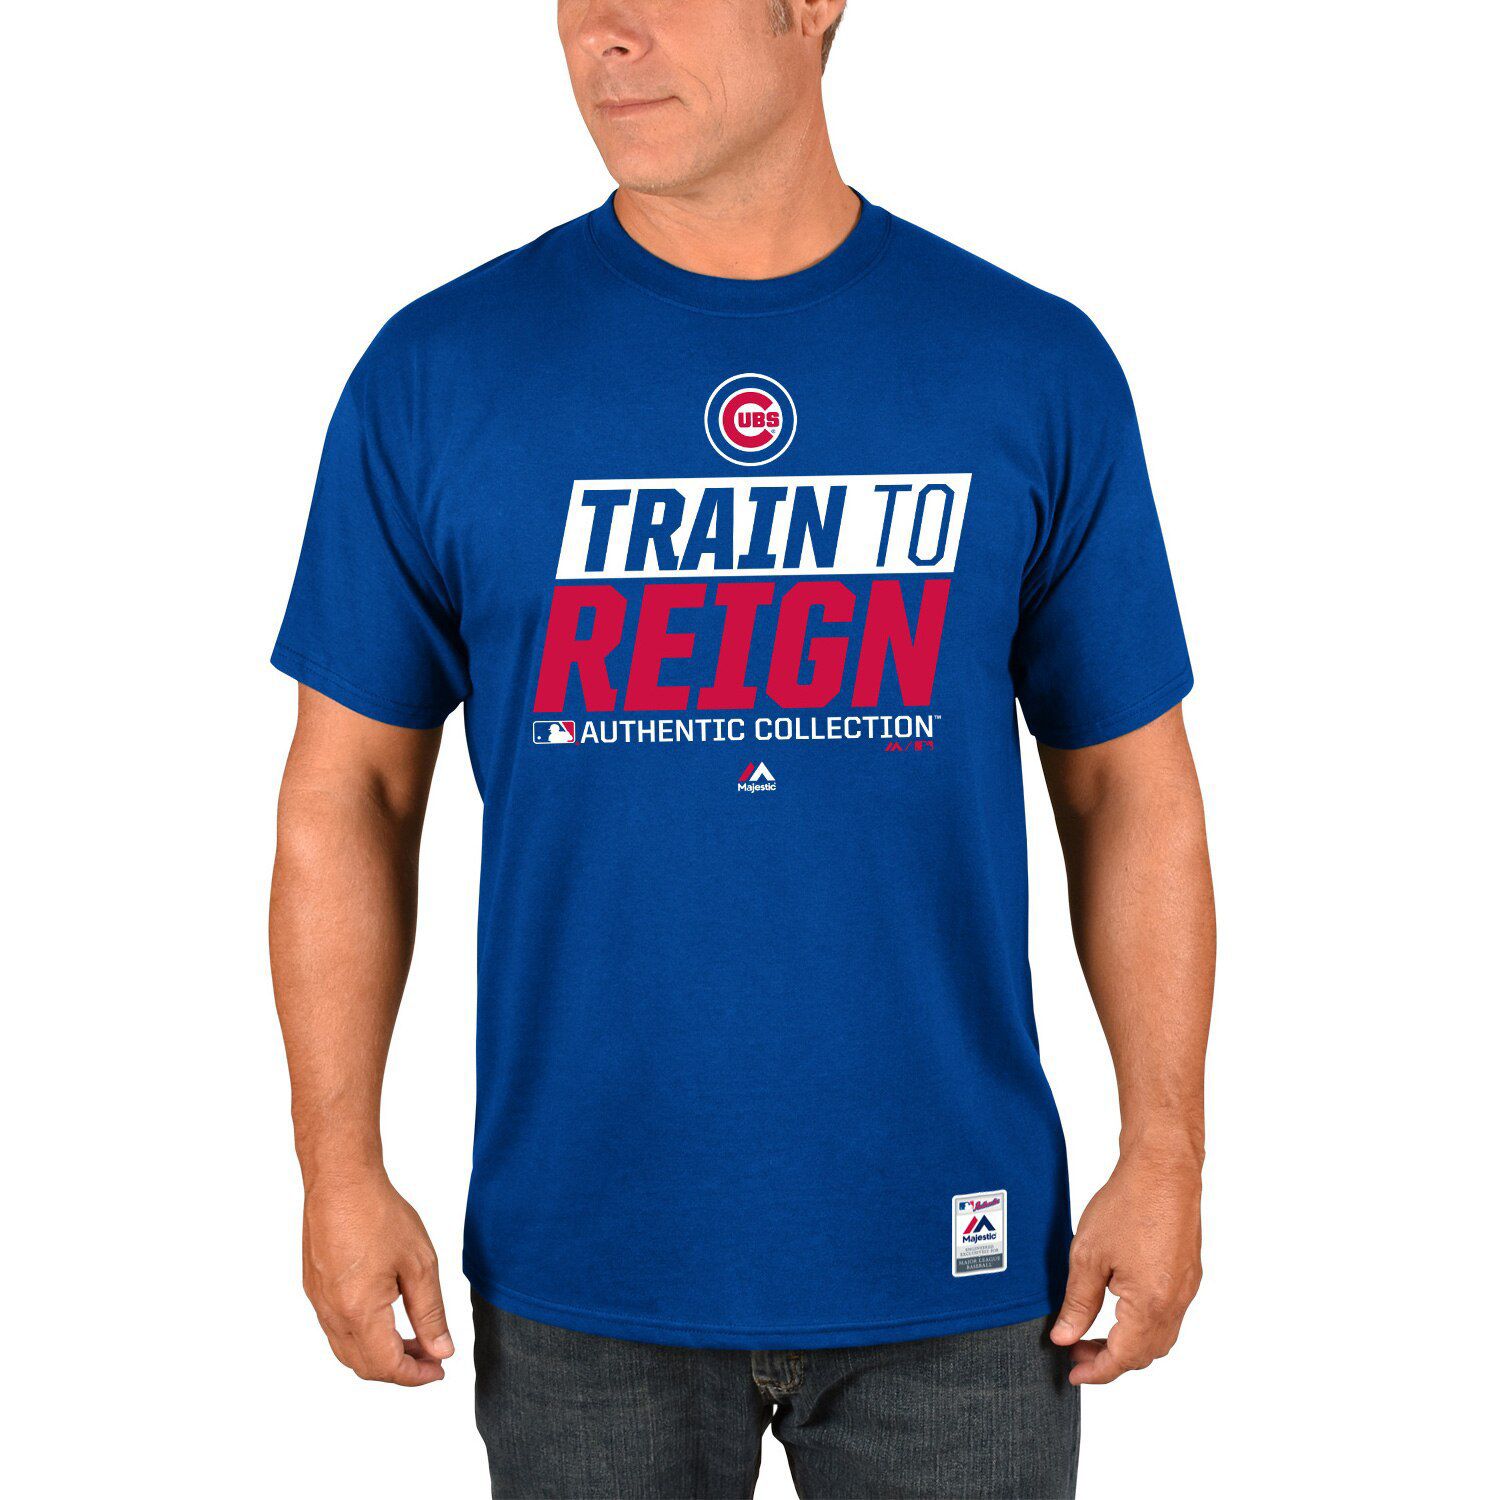 chicago cubs spring training jerseys